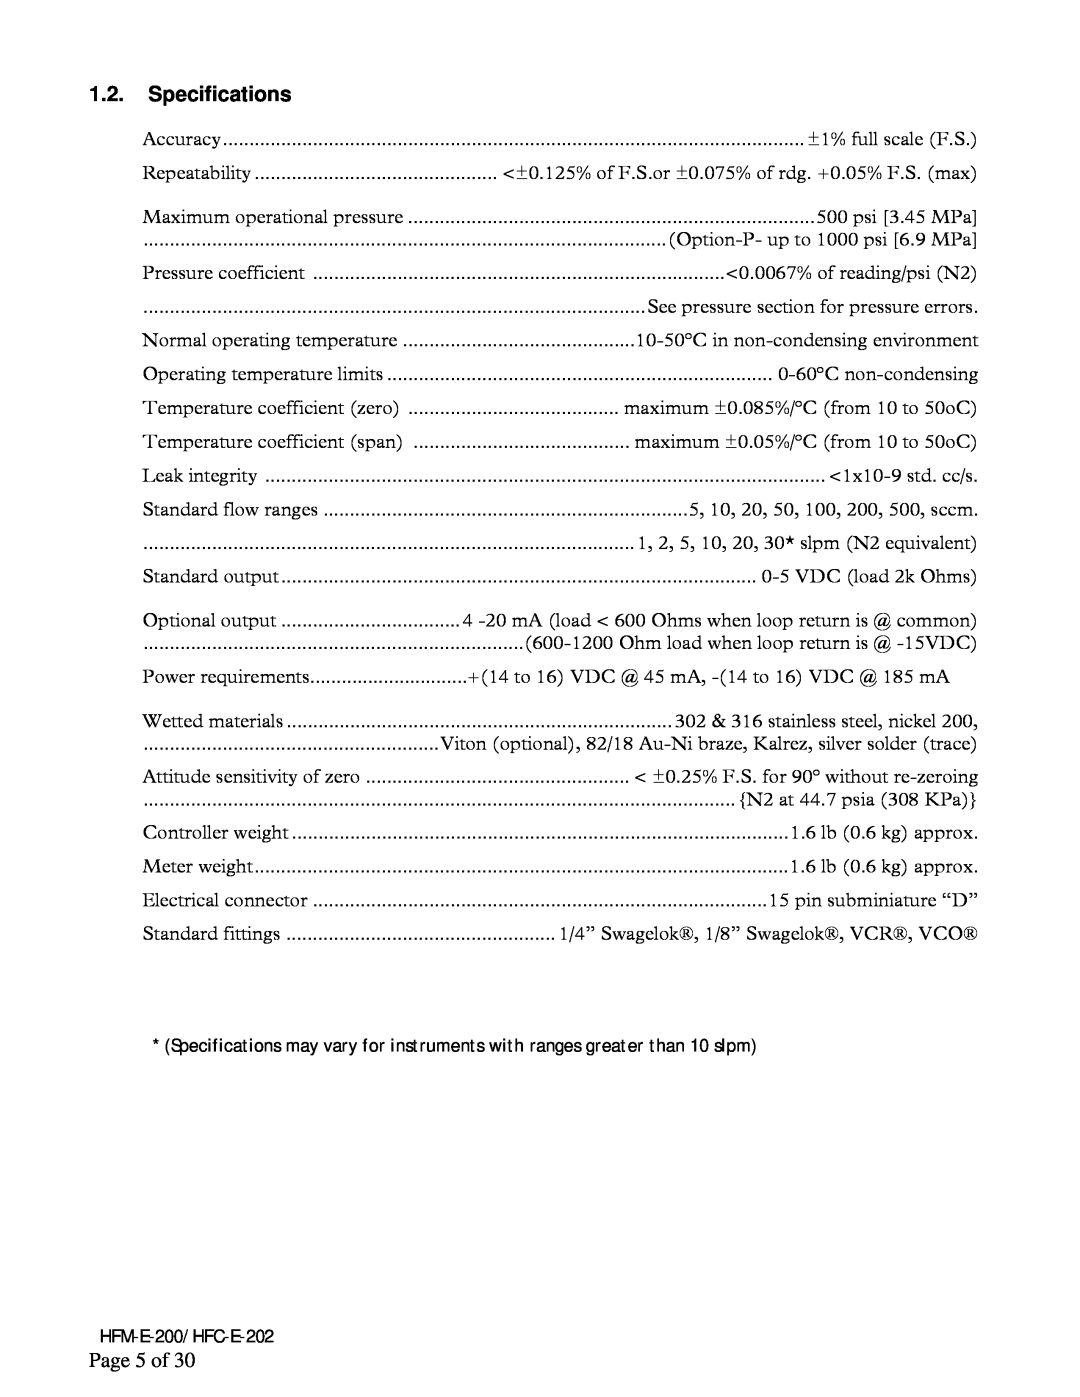 Teledyne HFM-E-200, HFC-E-202 instruction manual Specifications, Page 5 of 